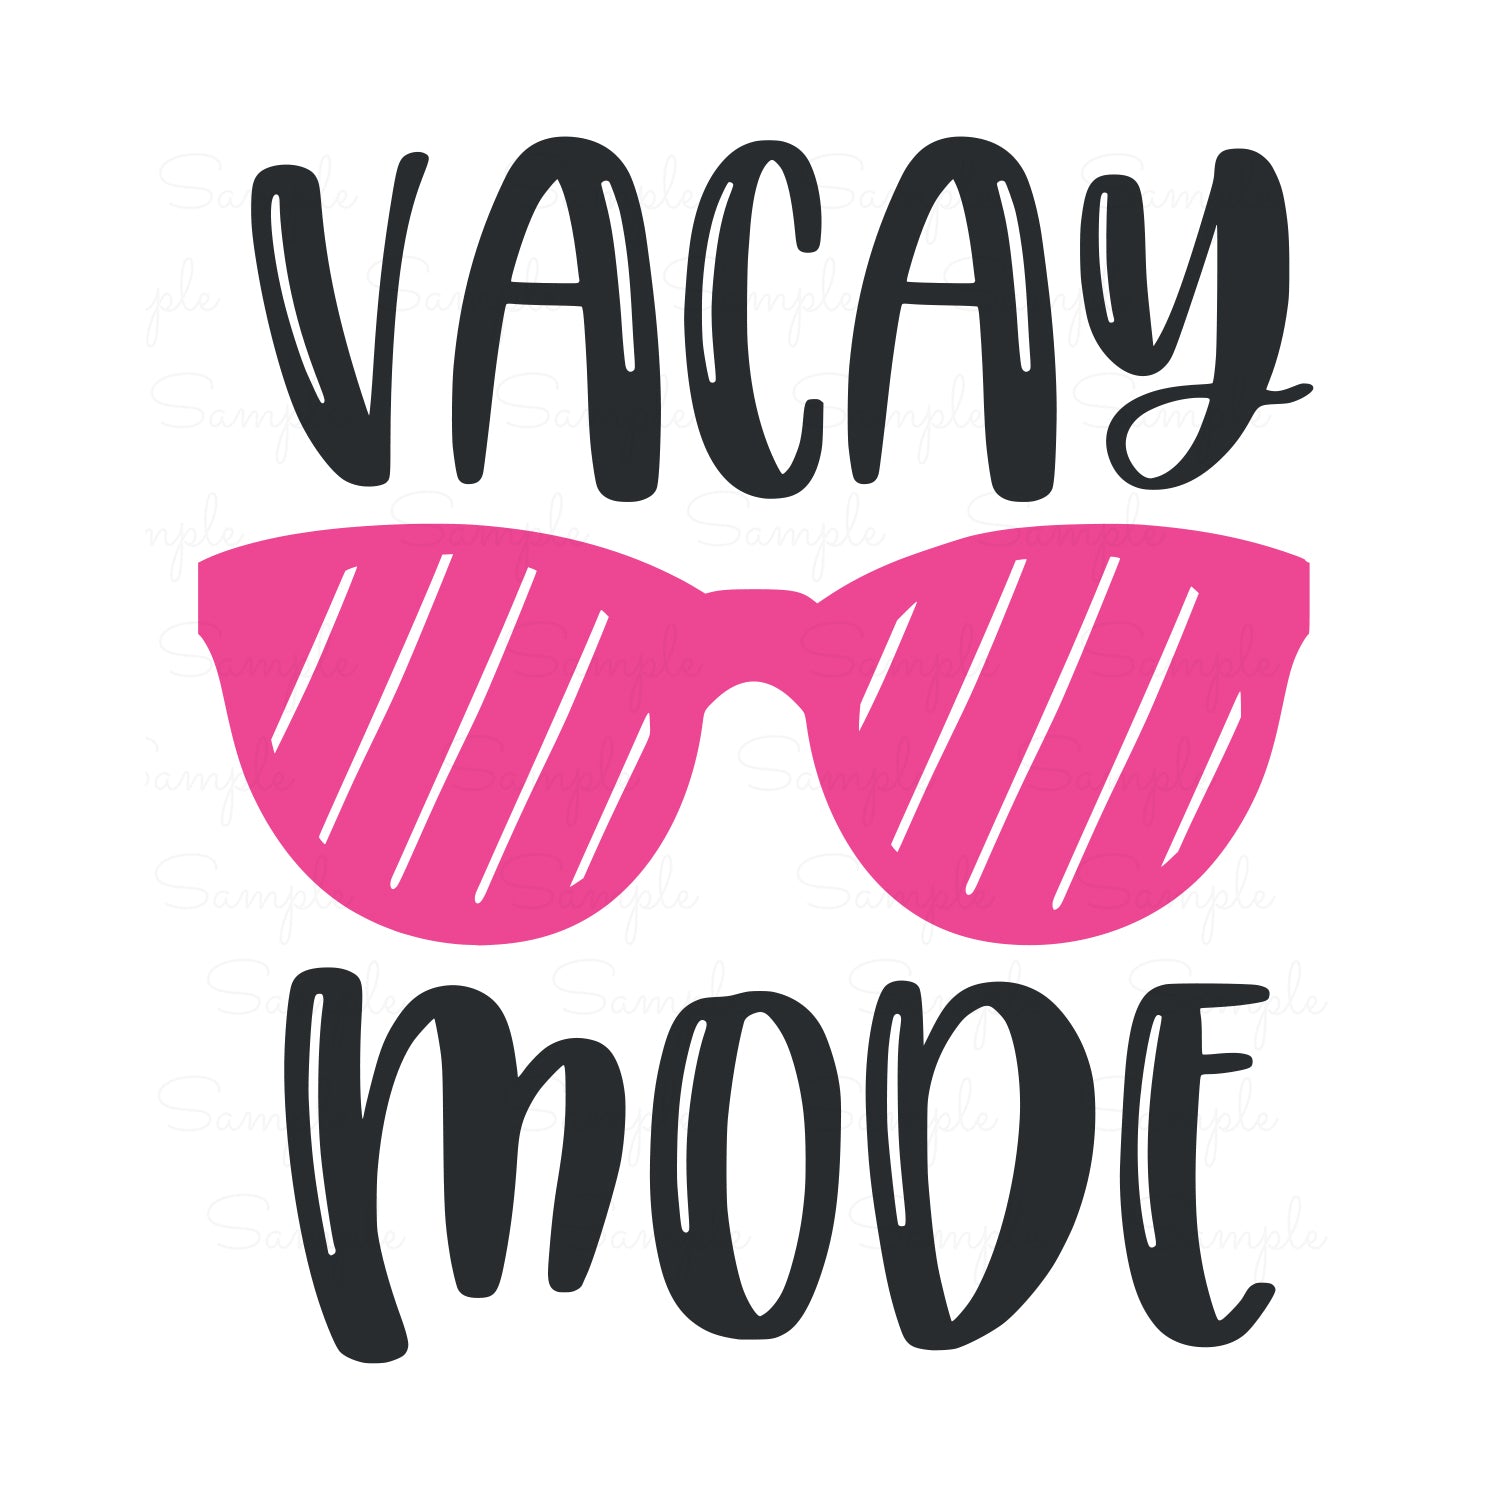 Vacay Mode Ready to Press Transfer | LillysCrafts